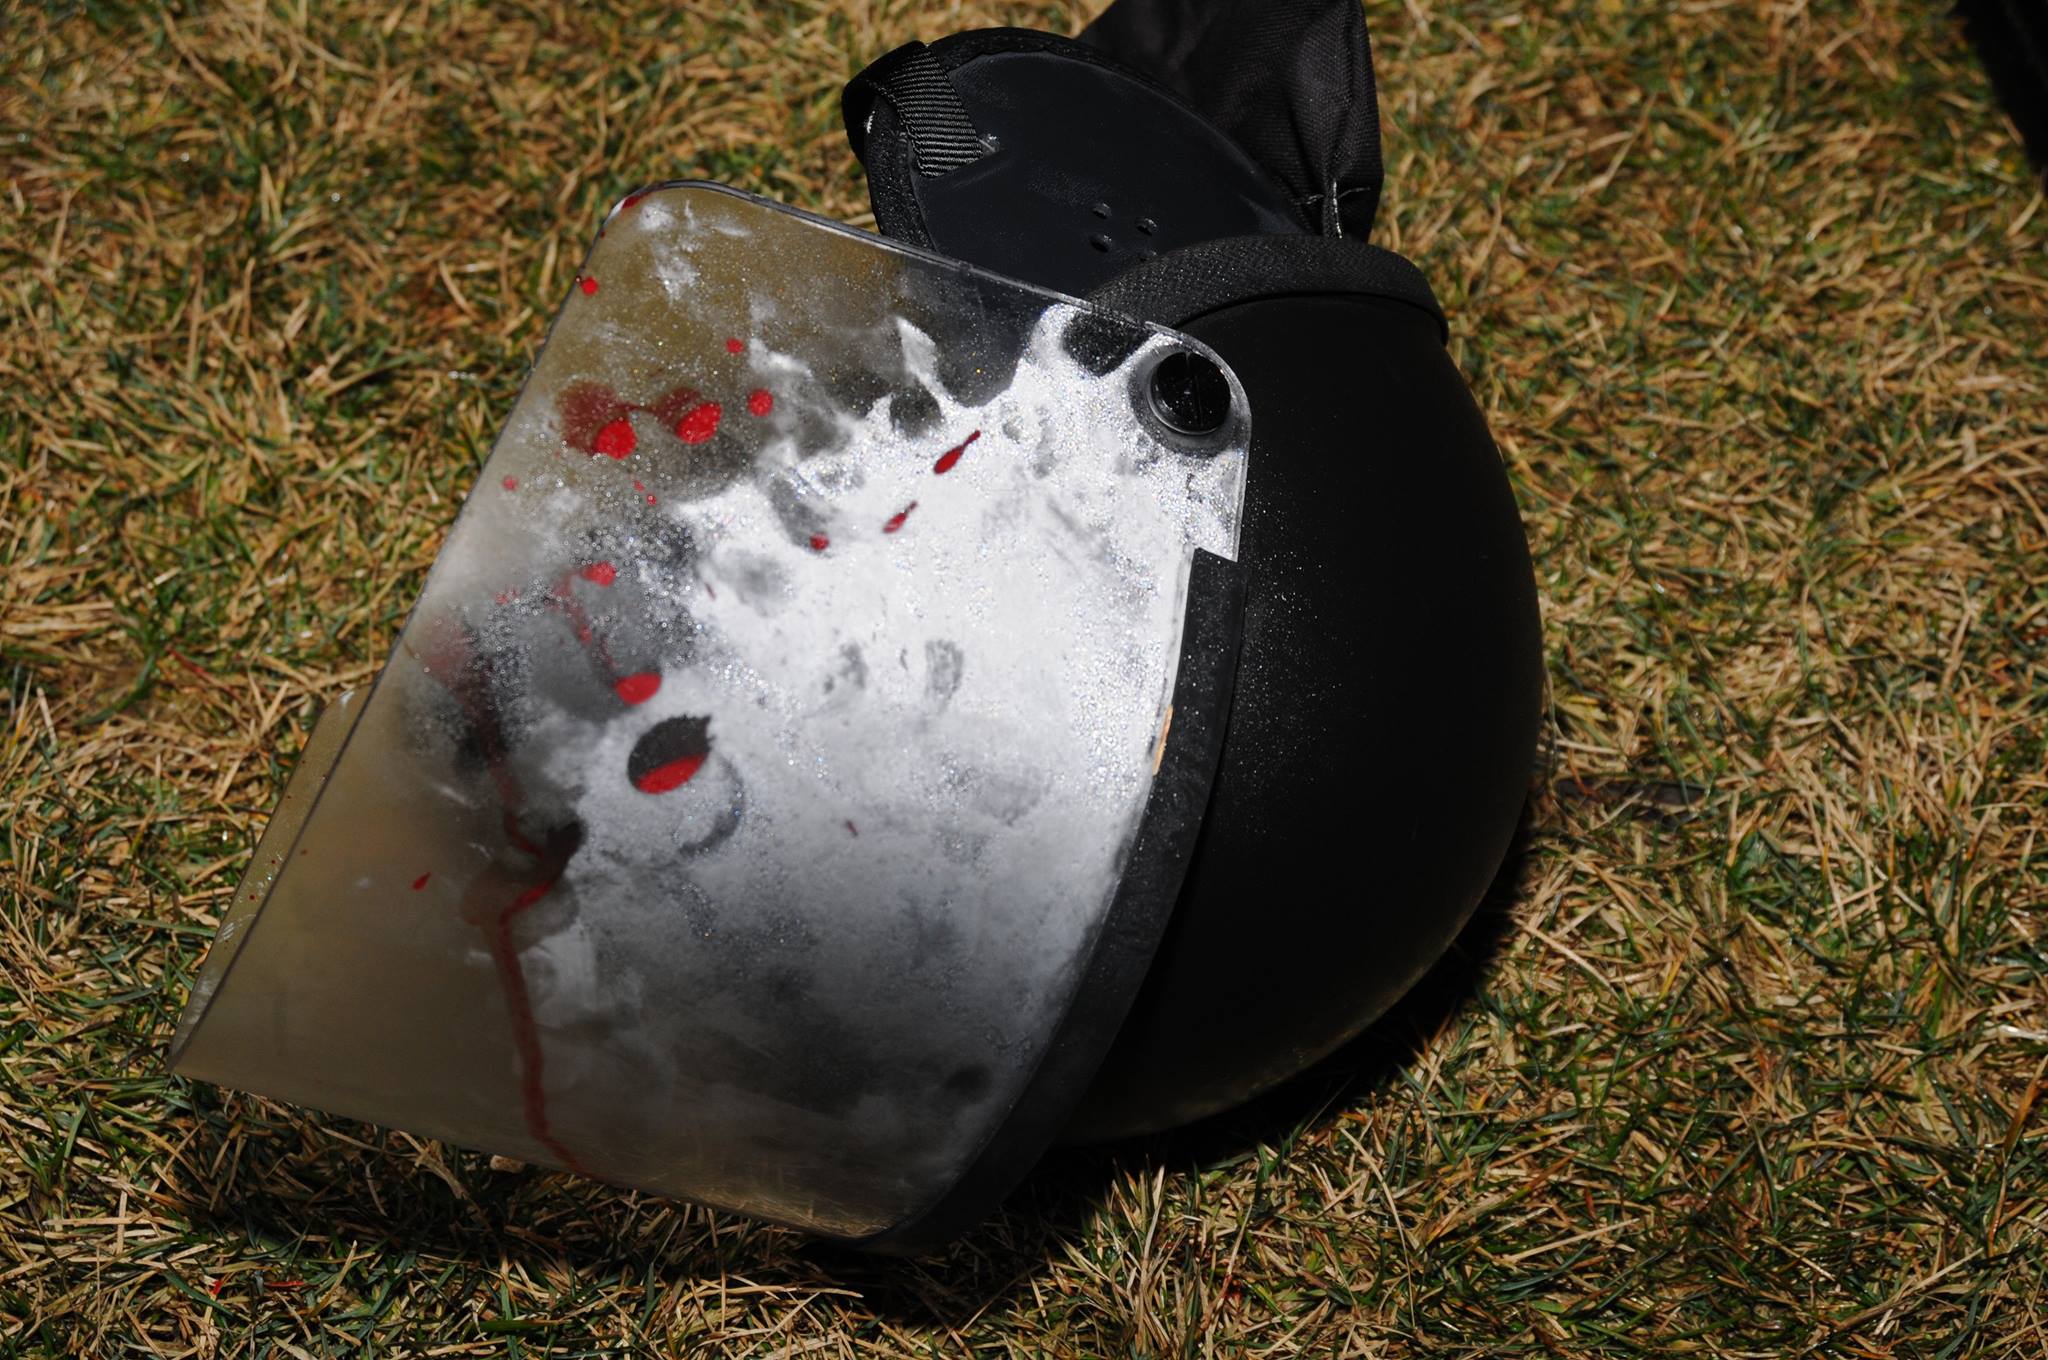 PHOTO: The St. Louis County Police posted images on their Facebook page of a bloodied police helmet on the ground after two police officers were shot outside of the Ferguson Police Department early March 12, 2015.